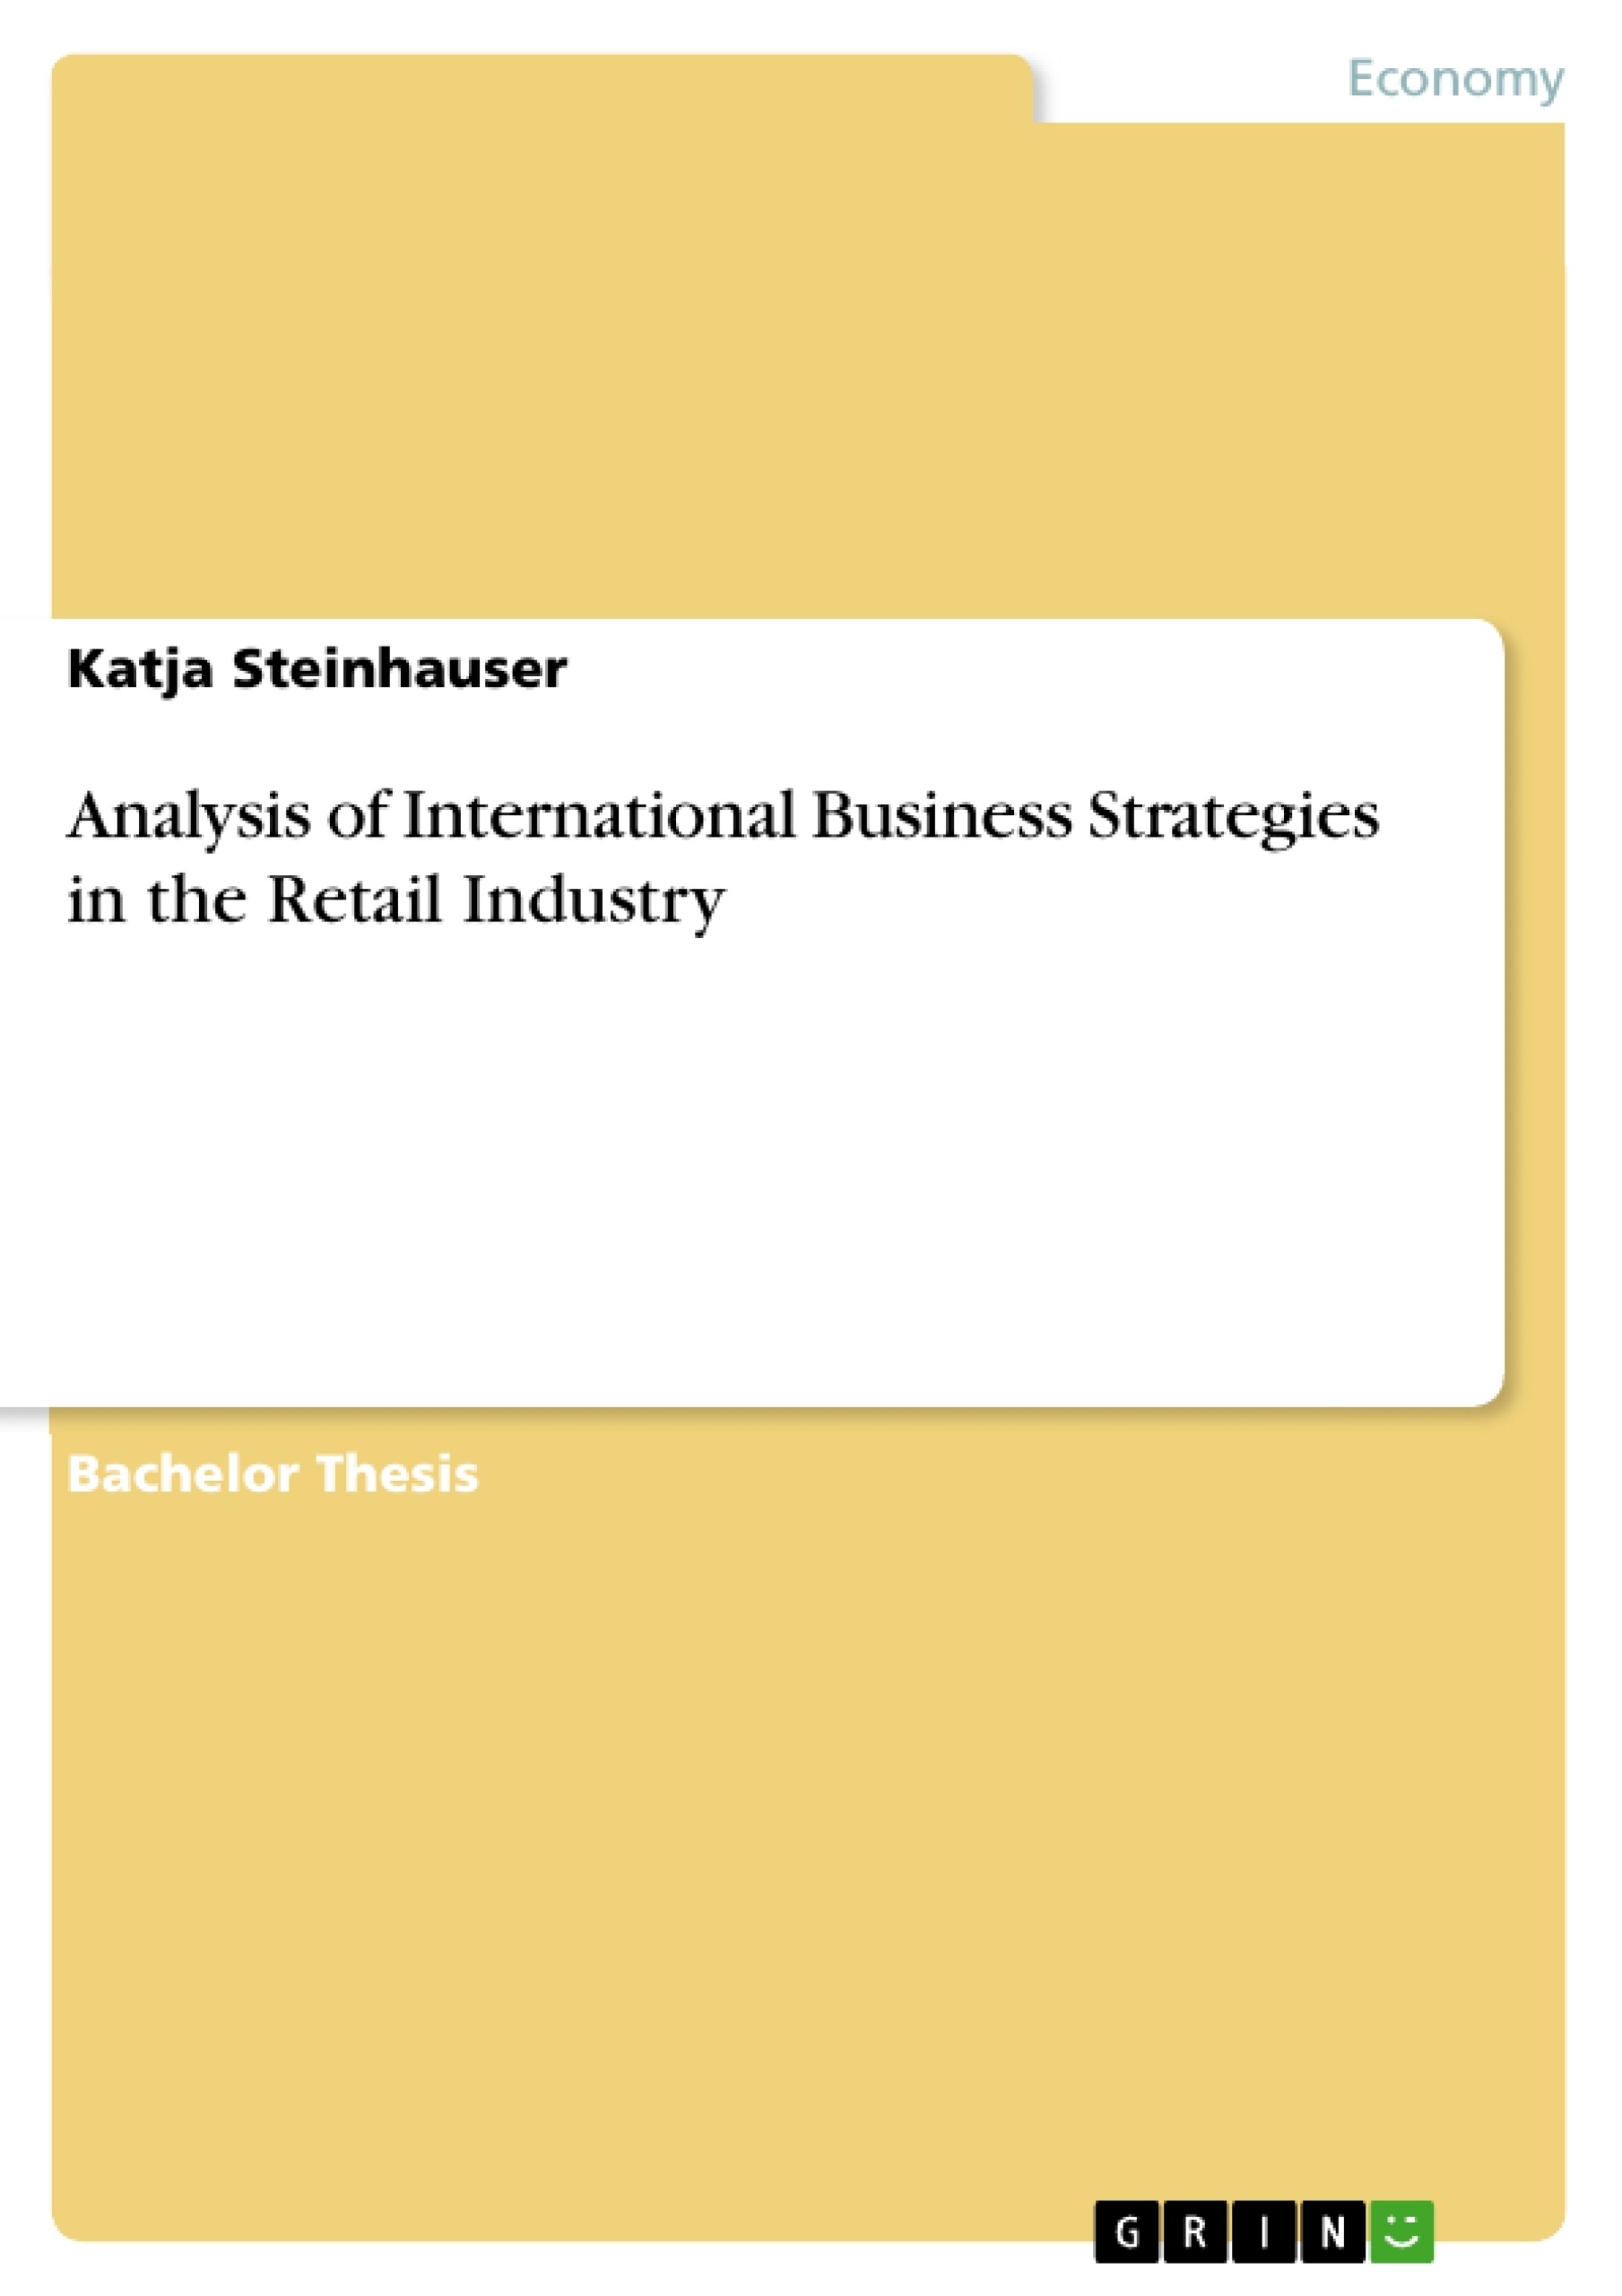 Title: Analysis of International Business Strategies in the Retail Industry